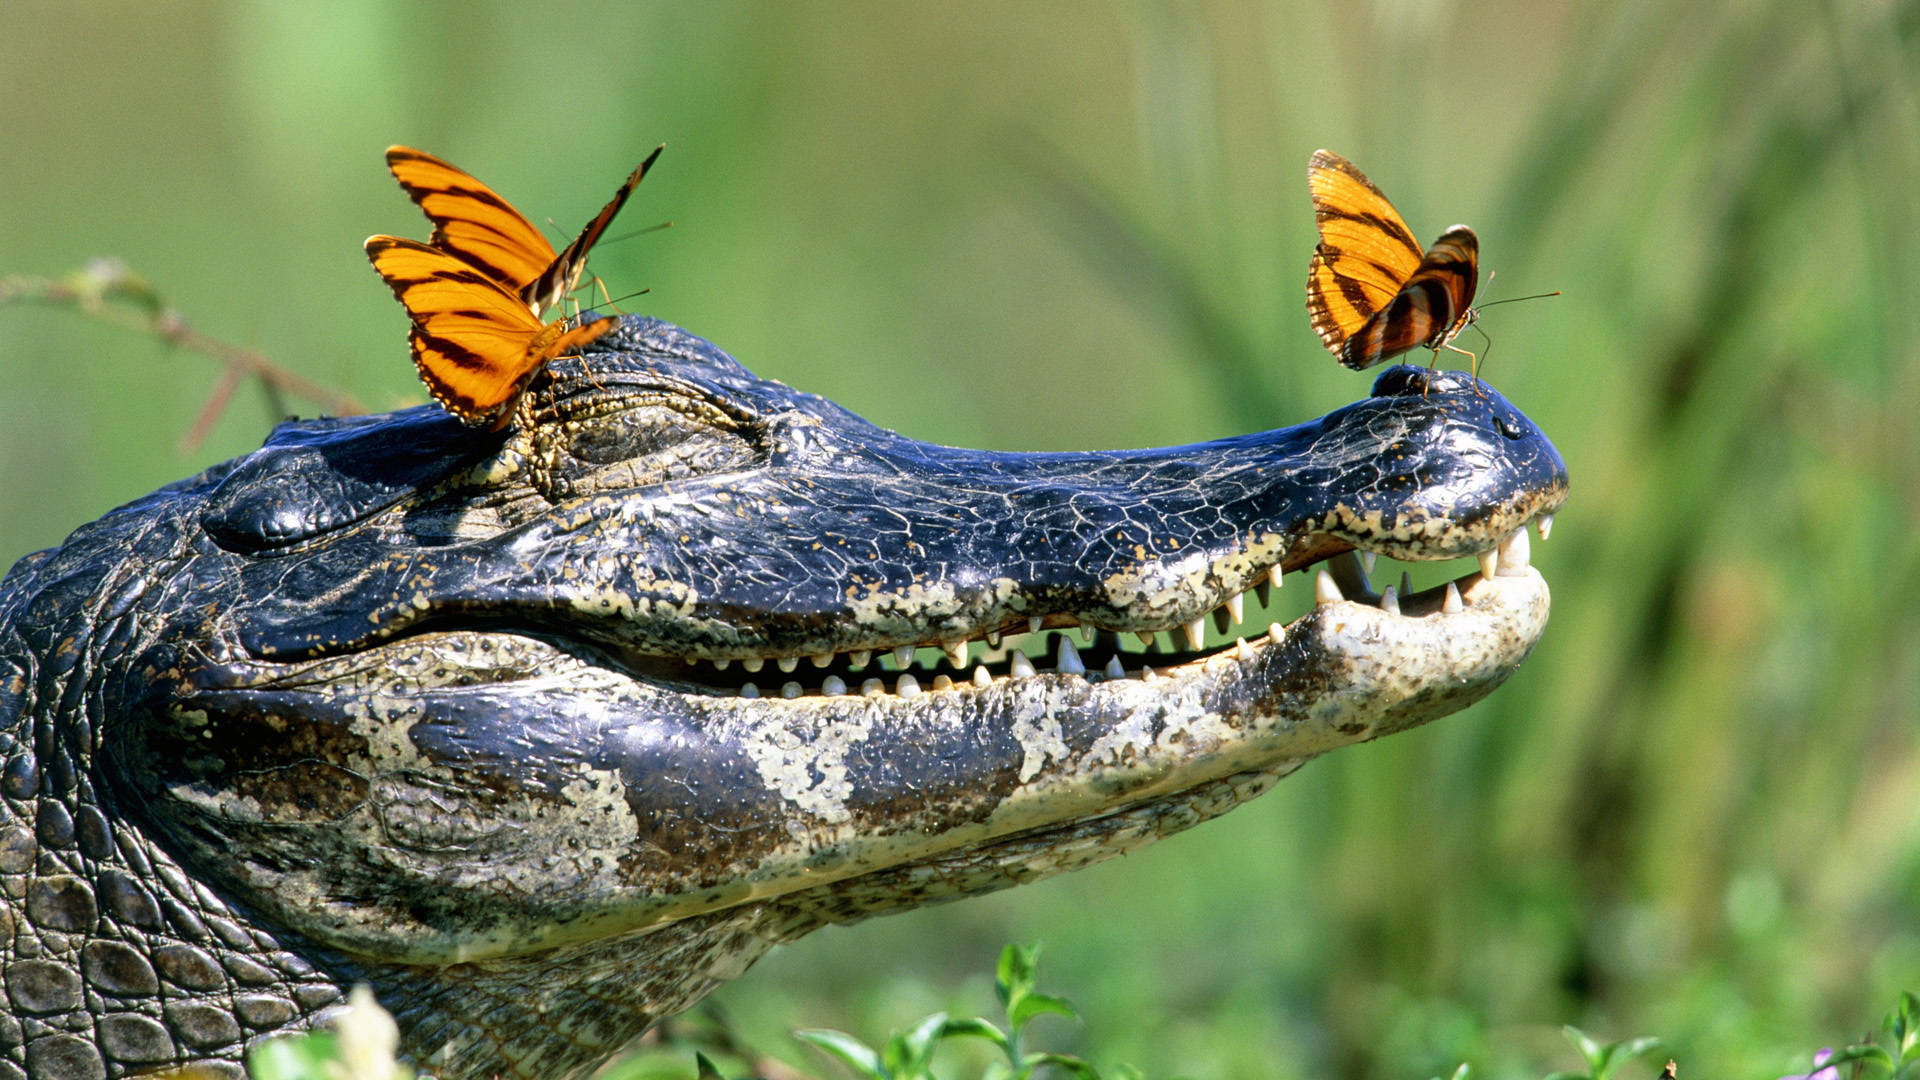 Alligator Photos Download The BEST Free Alligator Stock Photos  HD Images